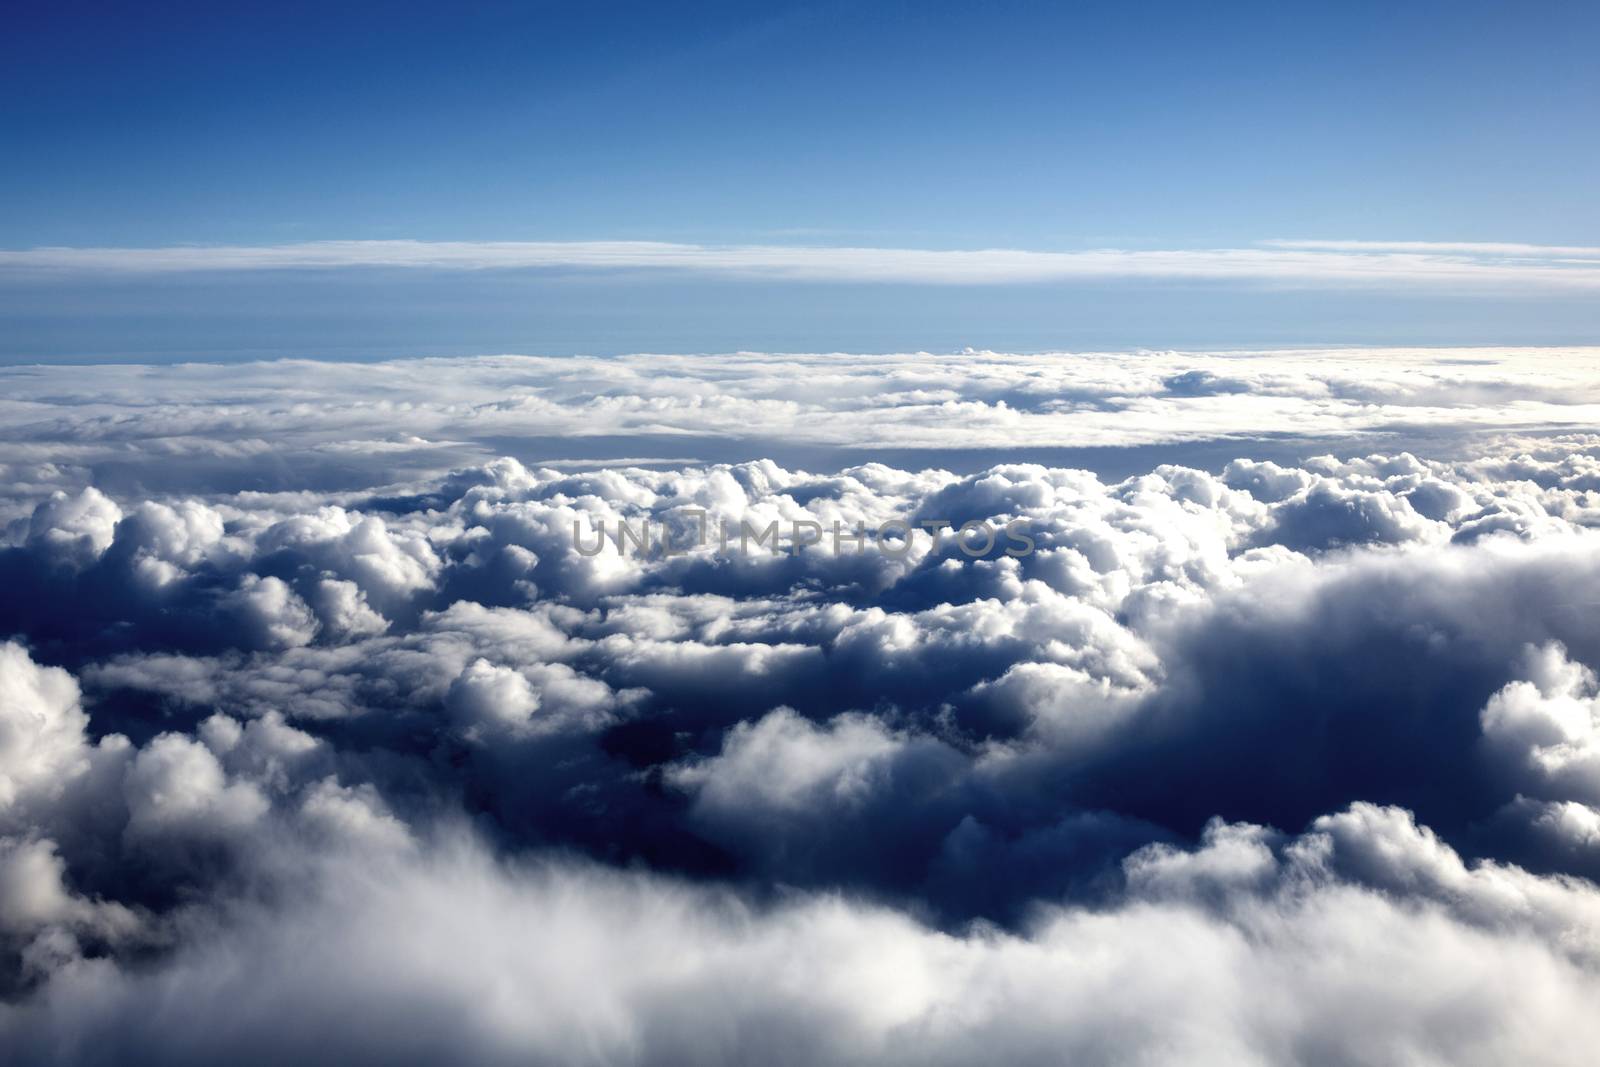 Looking Down at White Fluffy CLouds Against a Blue Sky by Whiteboxmedia